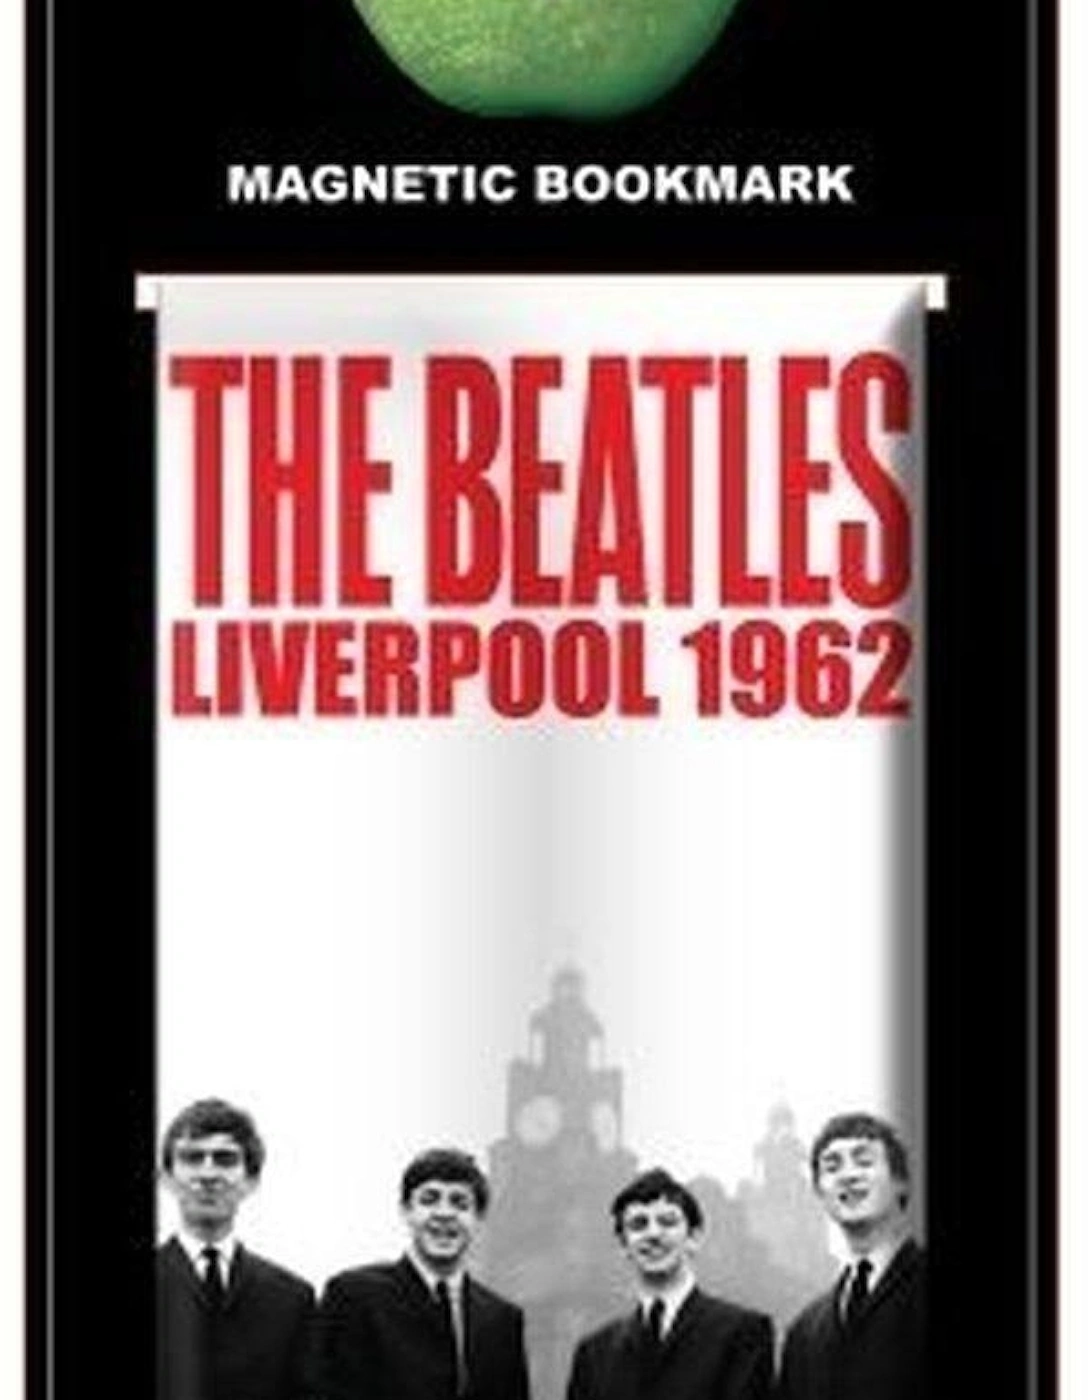 In Liverpool Magnetic Bookmark, 2 of 1